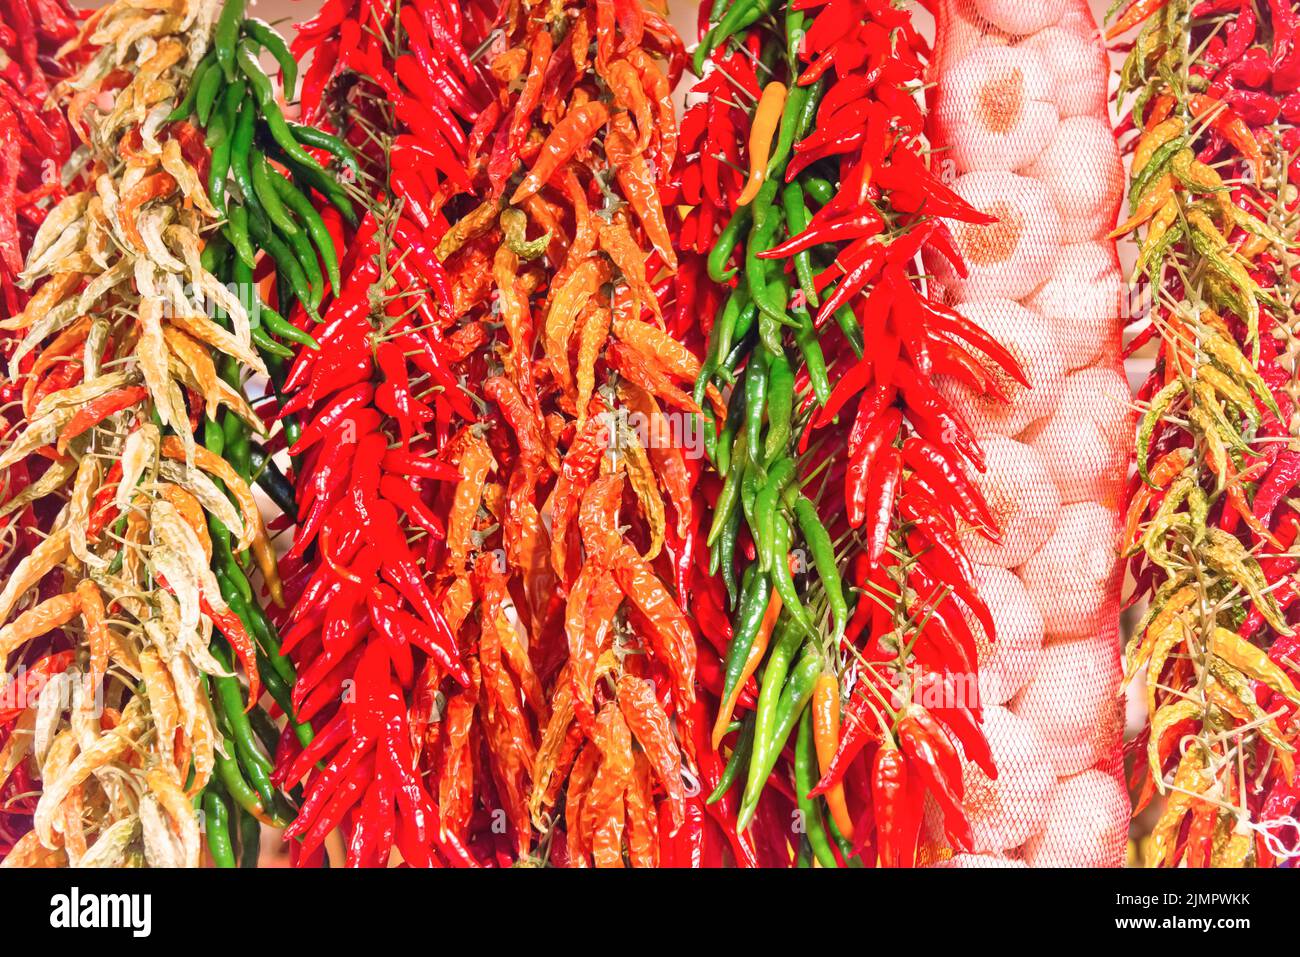 Red and green hot chilly peppers Stock Photo